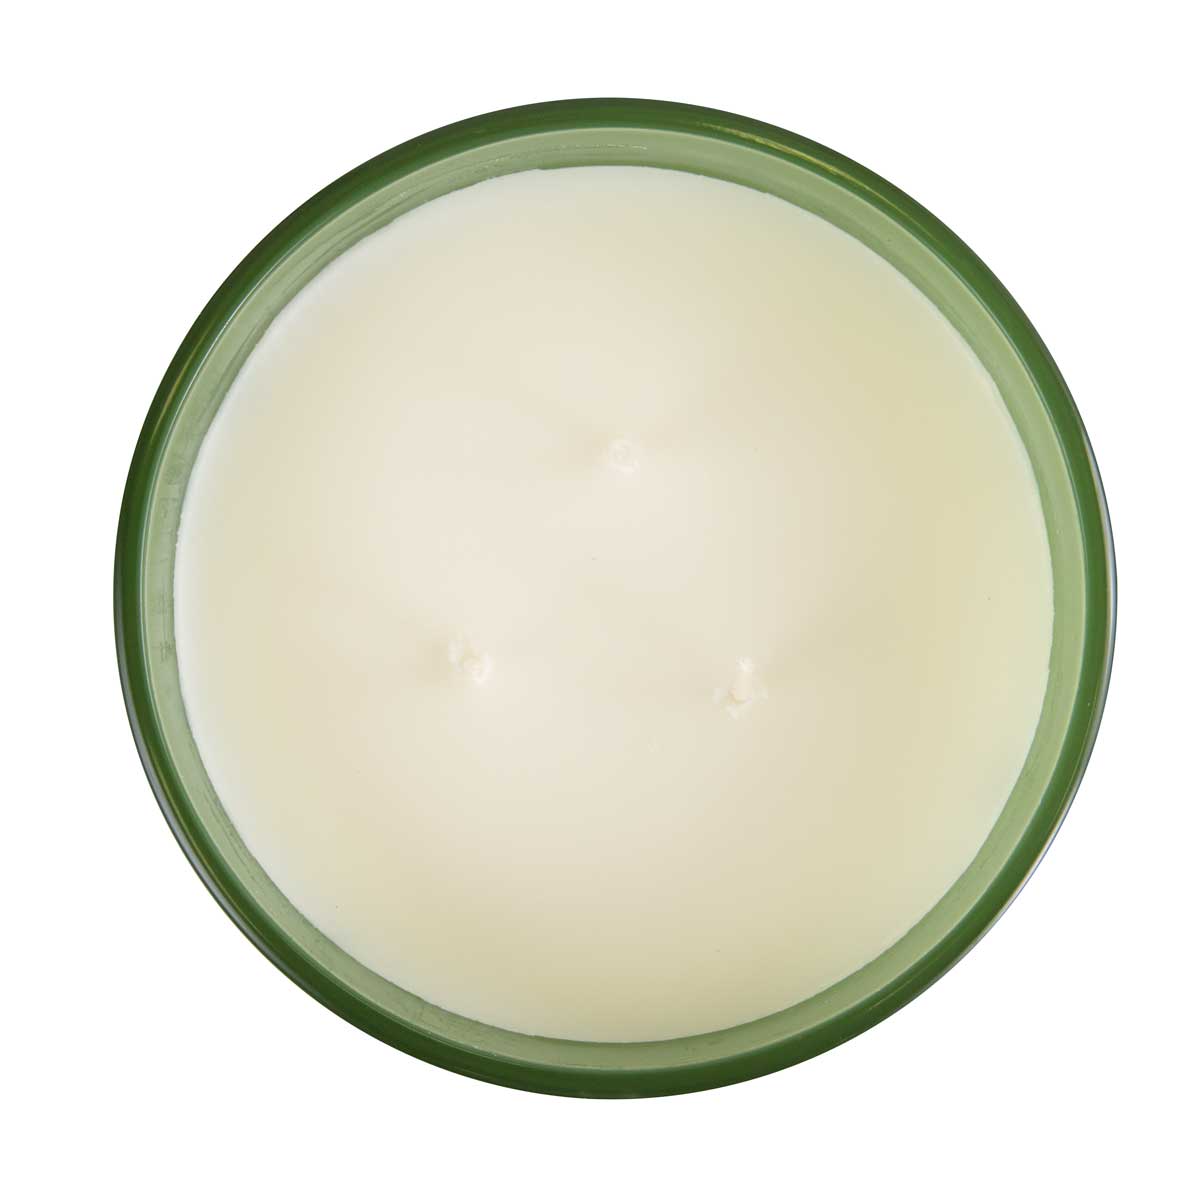 Pier 1 Apple Mint Filled 3-Wick 14oz Candle - 3-Wick Candles